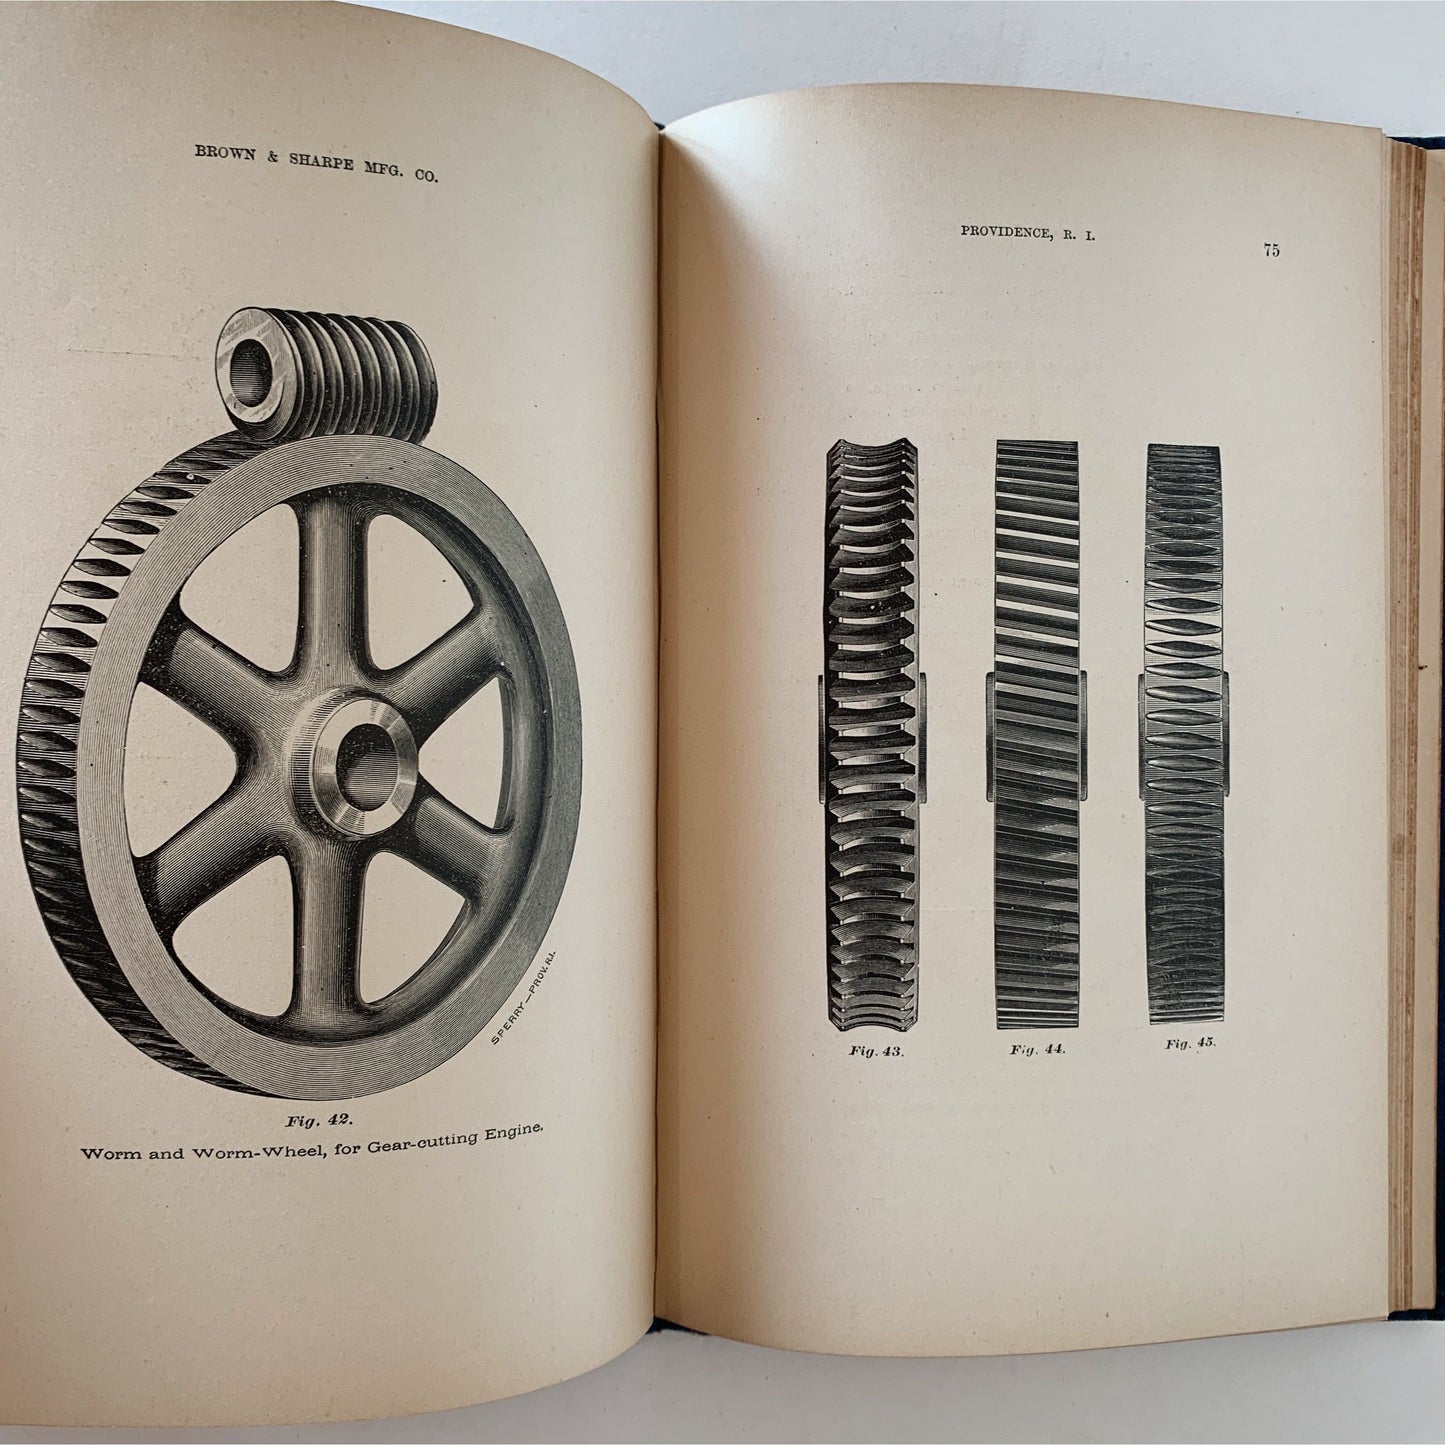 Practical Treatise on Gearing, Illustrated Technical Book, 1896